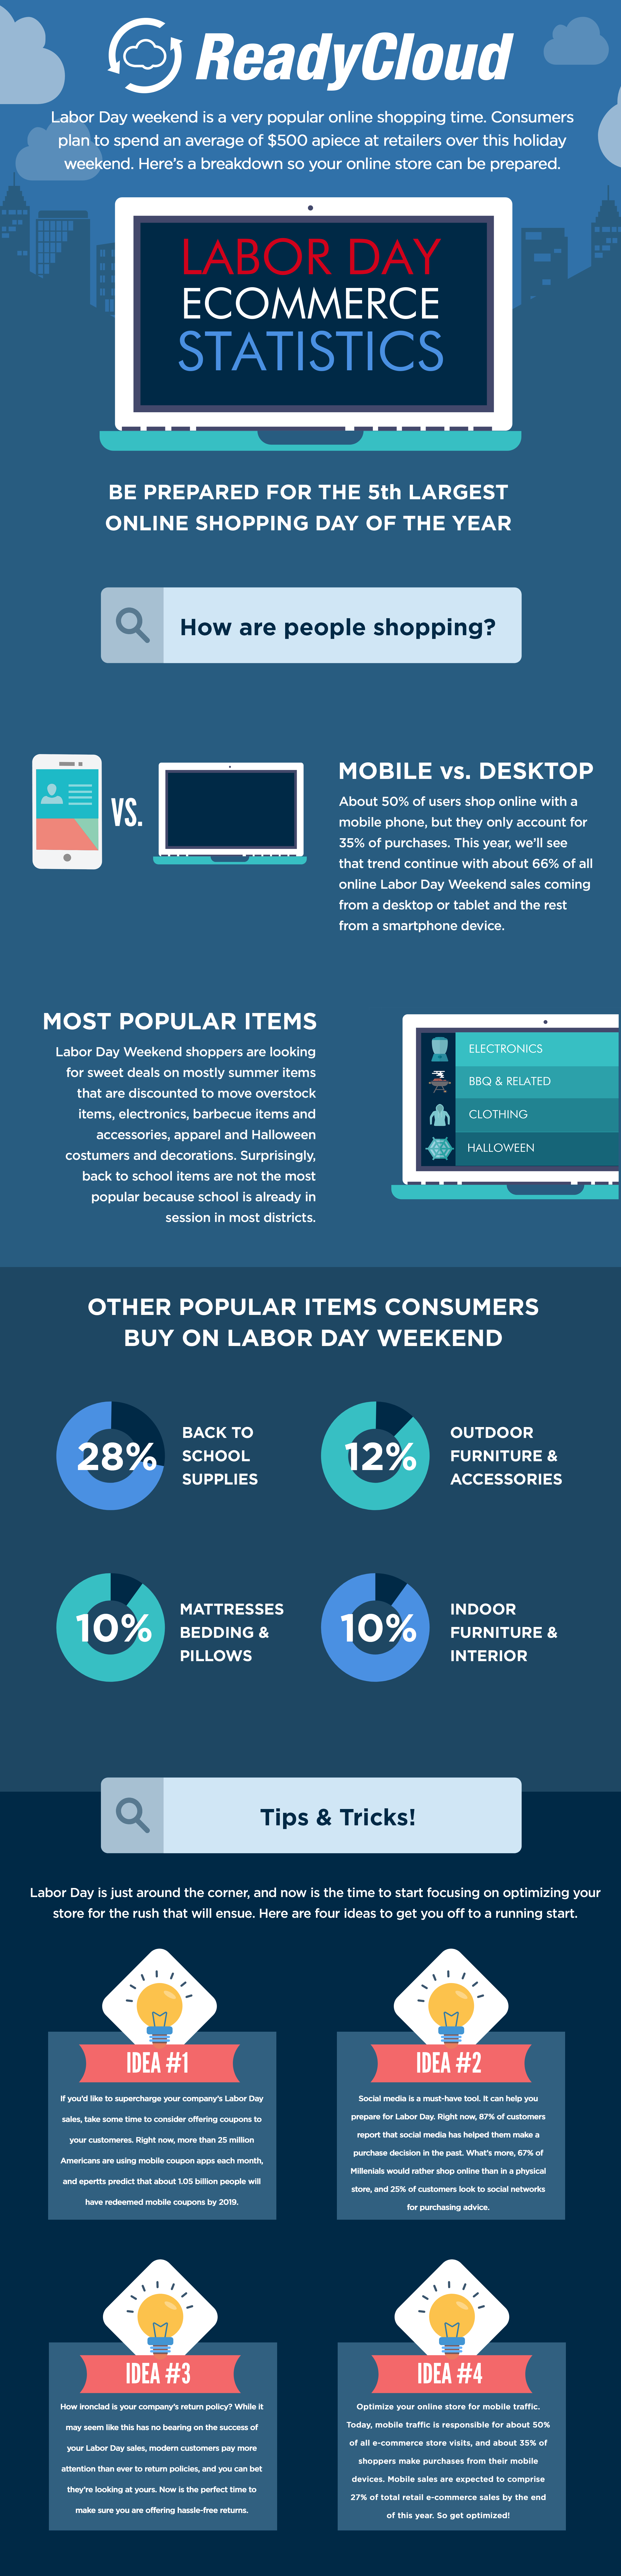 labor day weekend, Labor Day Ecommerce Statistics, statistics on Labor Day ecommerce, Labor Day shopping statistics, Labor Day ecommerce sales, Labor Day online sales statistics, 2018 Labor ecommerce statistics